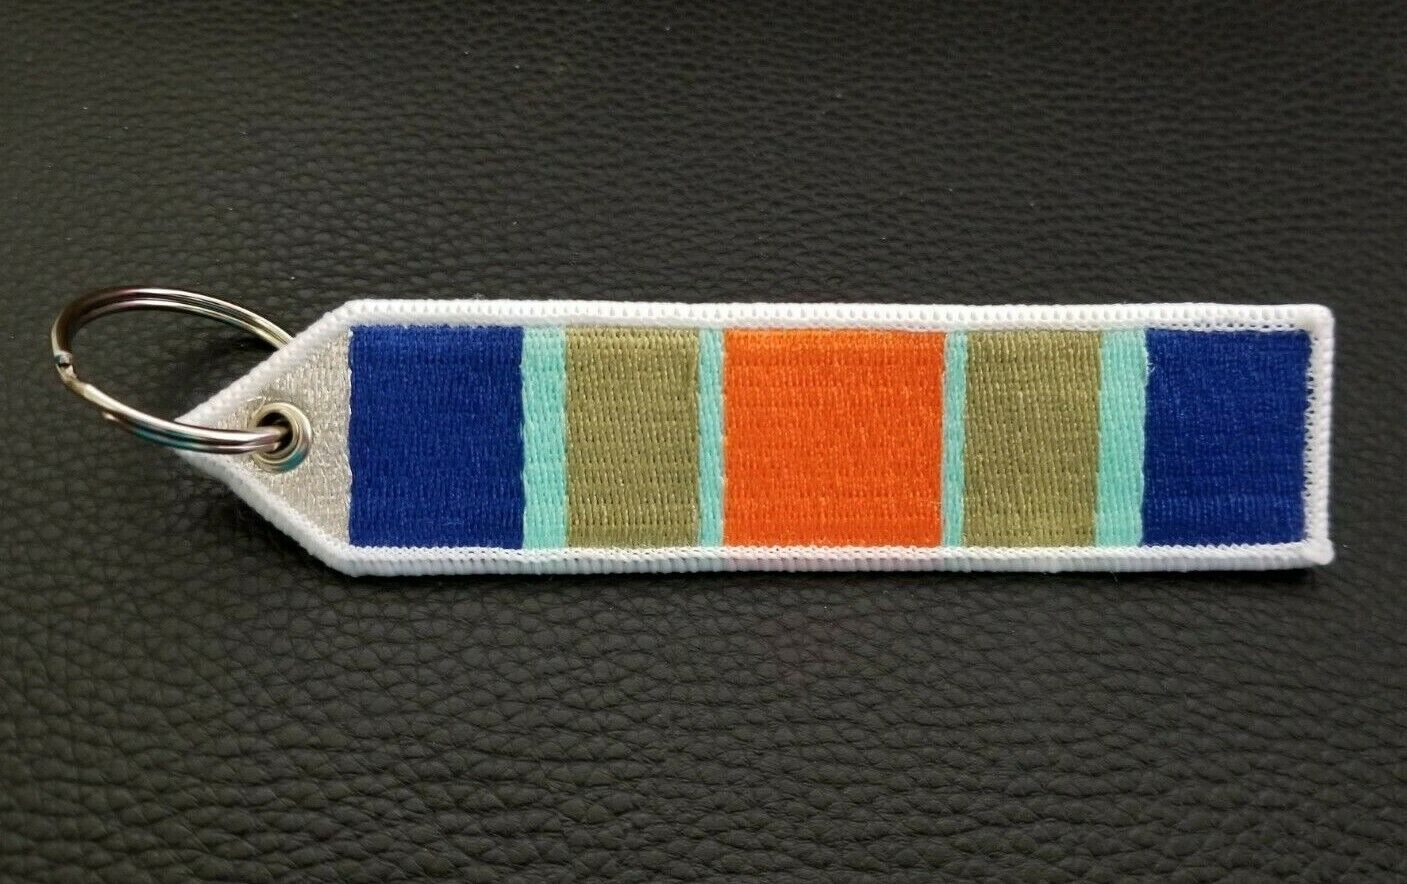 OIR OPERATION INHERENT RESOLVE Ribbon Medal Double Sided Embroider Keychain